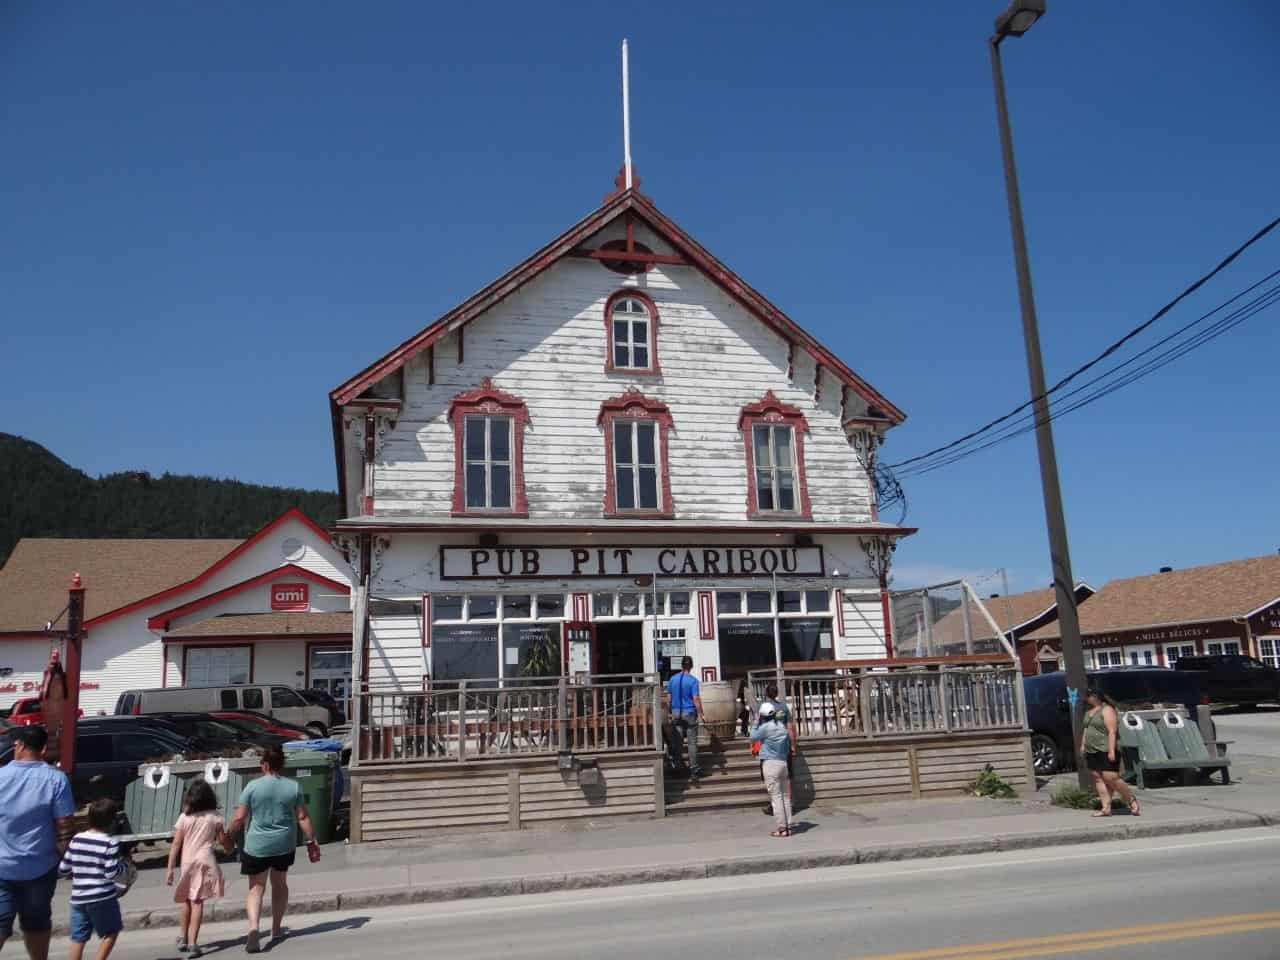 Pub Pit Caribou is one of many restaurants and pubs along the Gaspe Peninsula route in Quebec Canada.